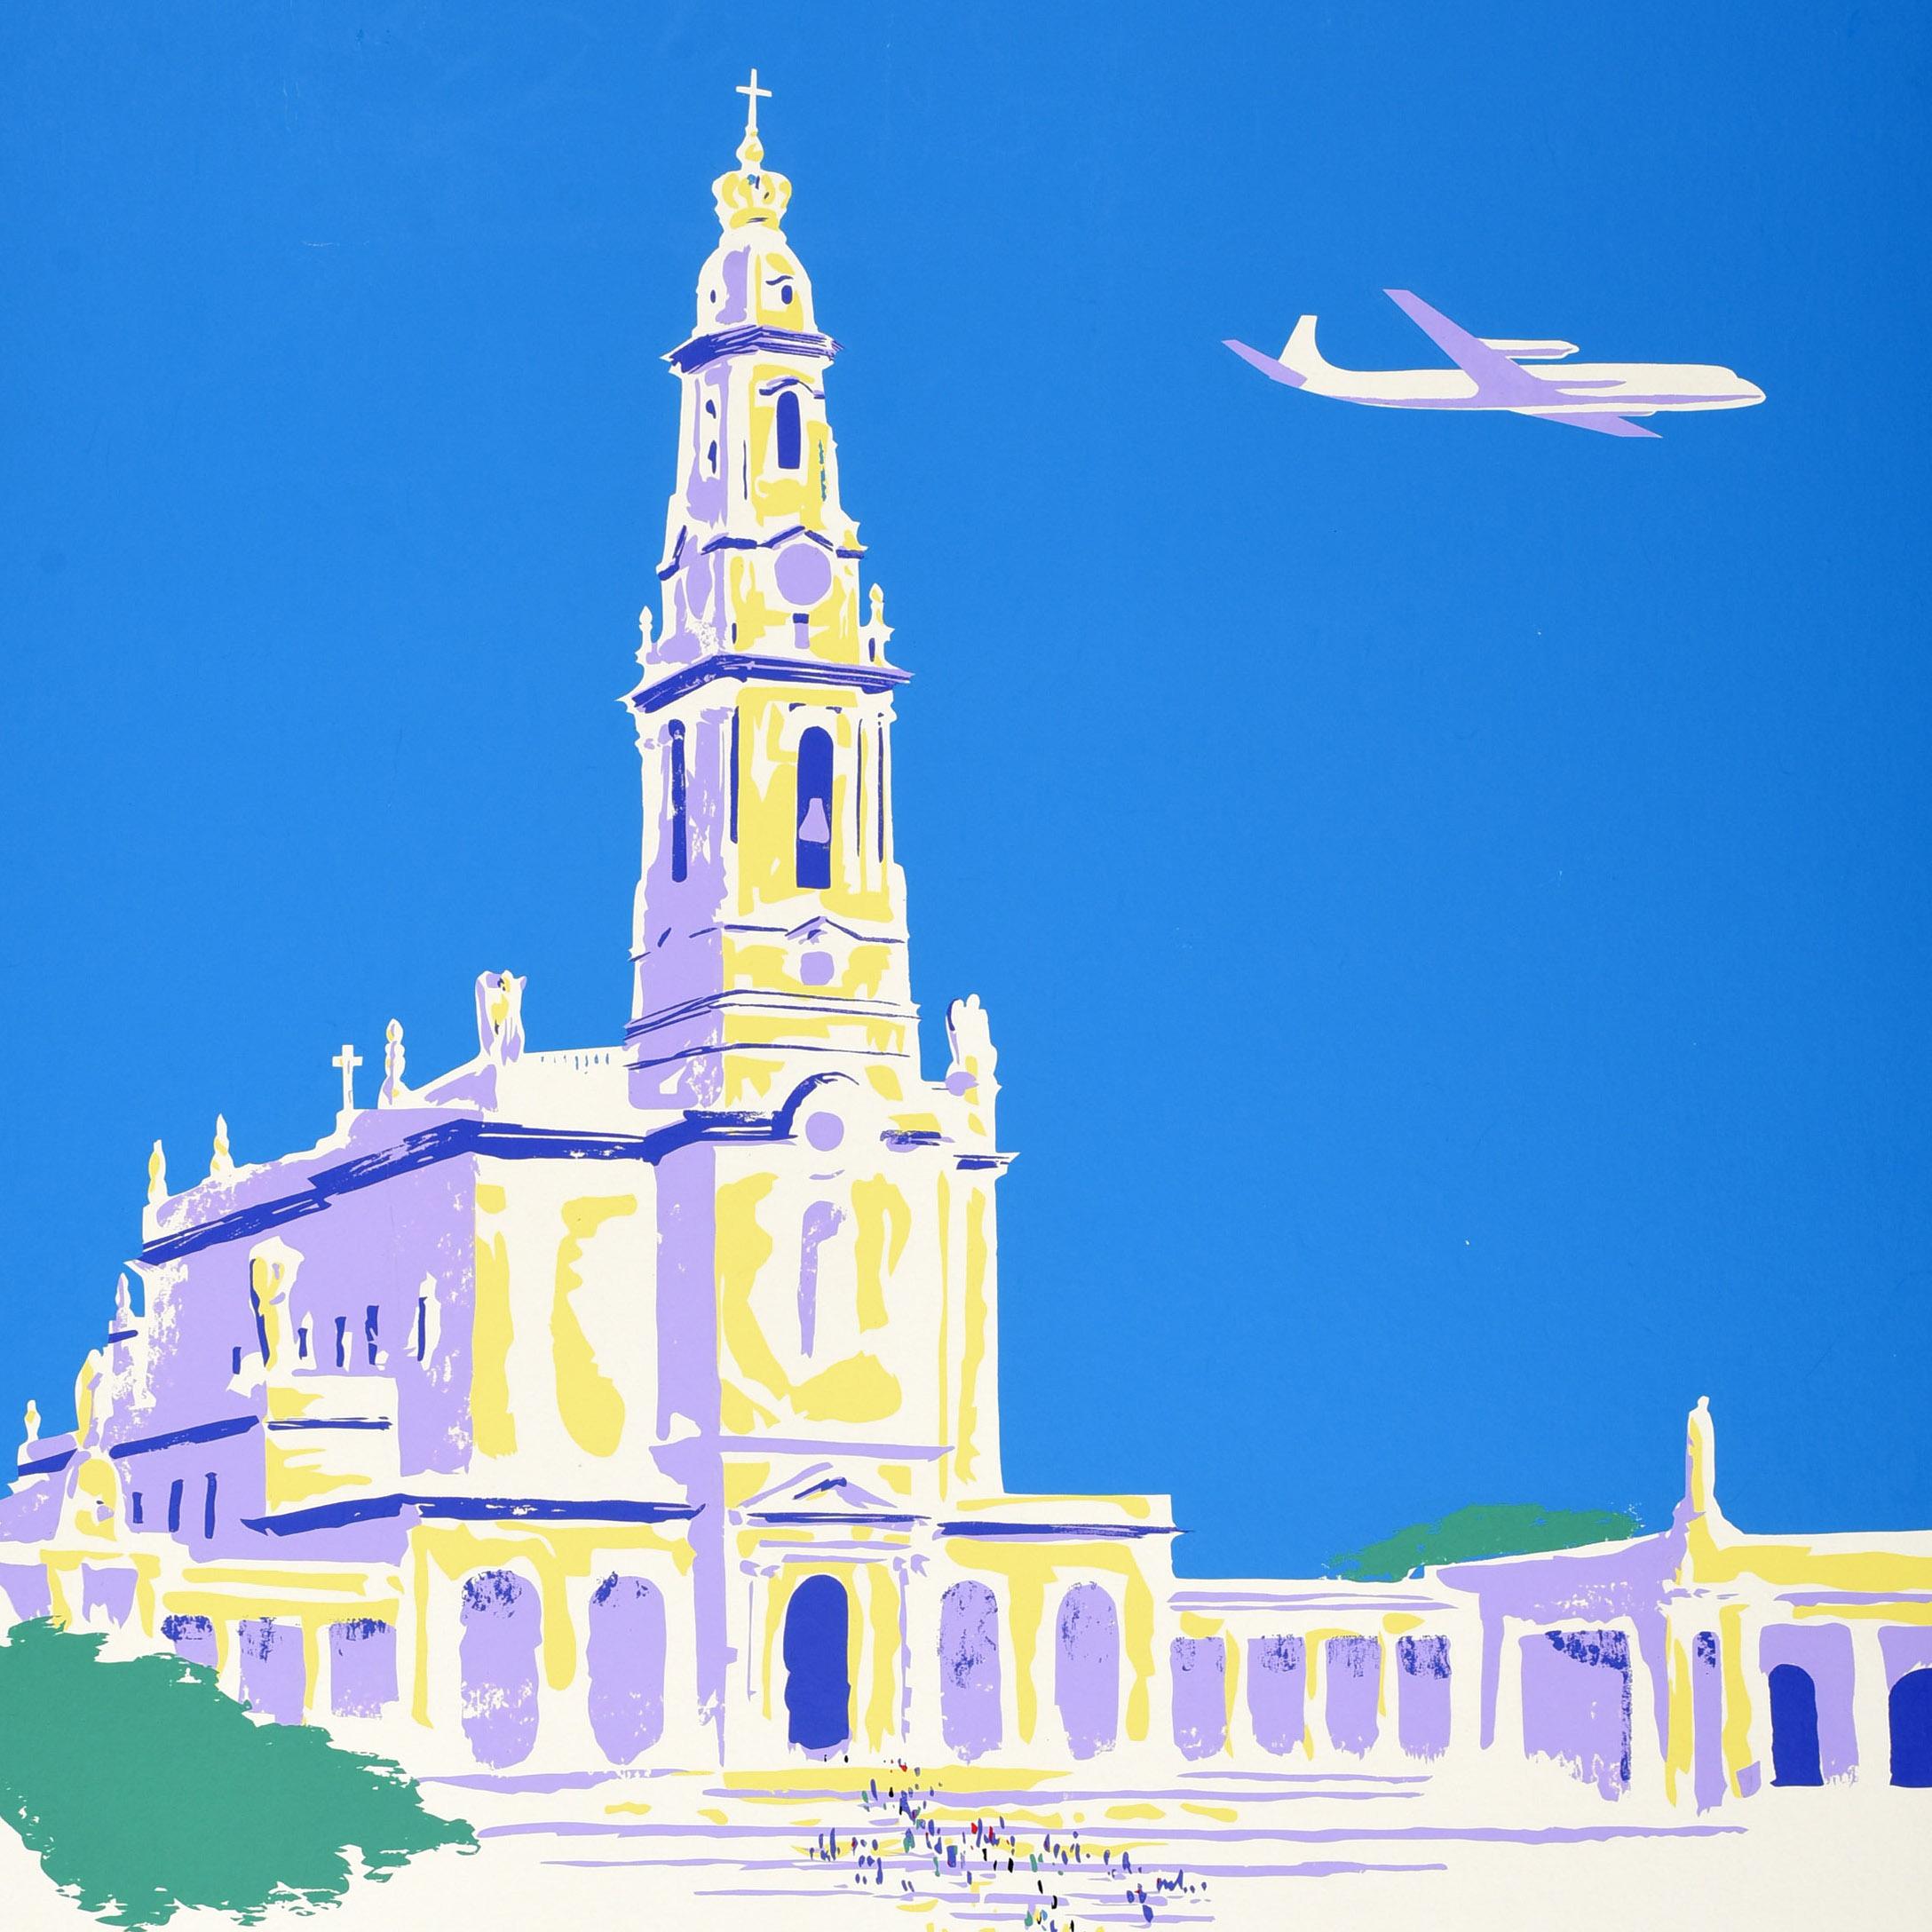 Original vintage travel poster for Fatima Irish International Airlines The Friendly Airline featuring people walking in front of the Basilica of Our Lady of the Rosary in the Sanctuary of Fatima in Portugal with a plane flying above near the bell